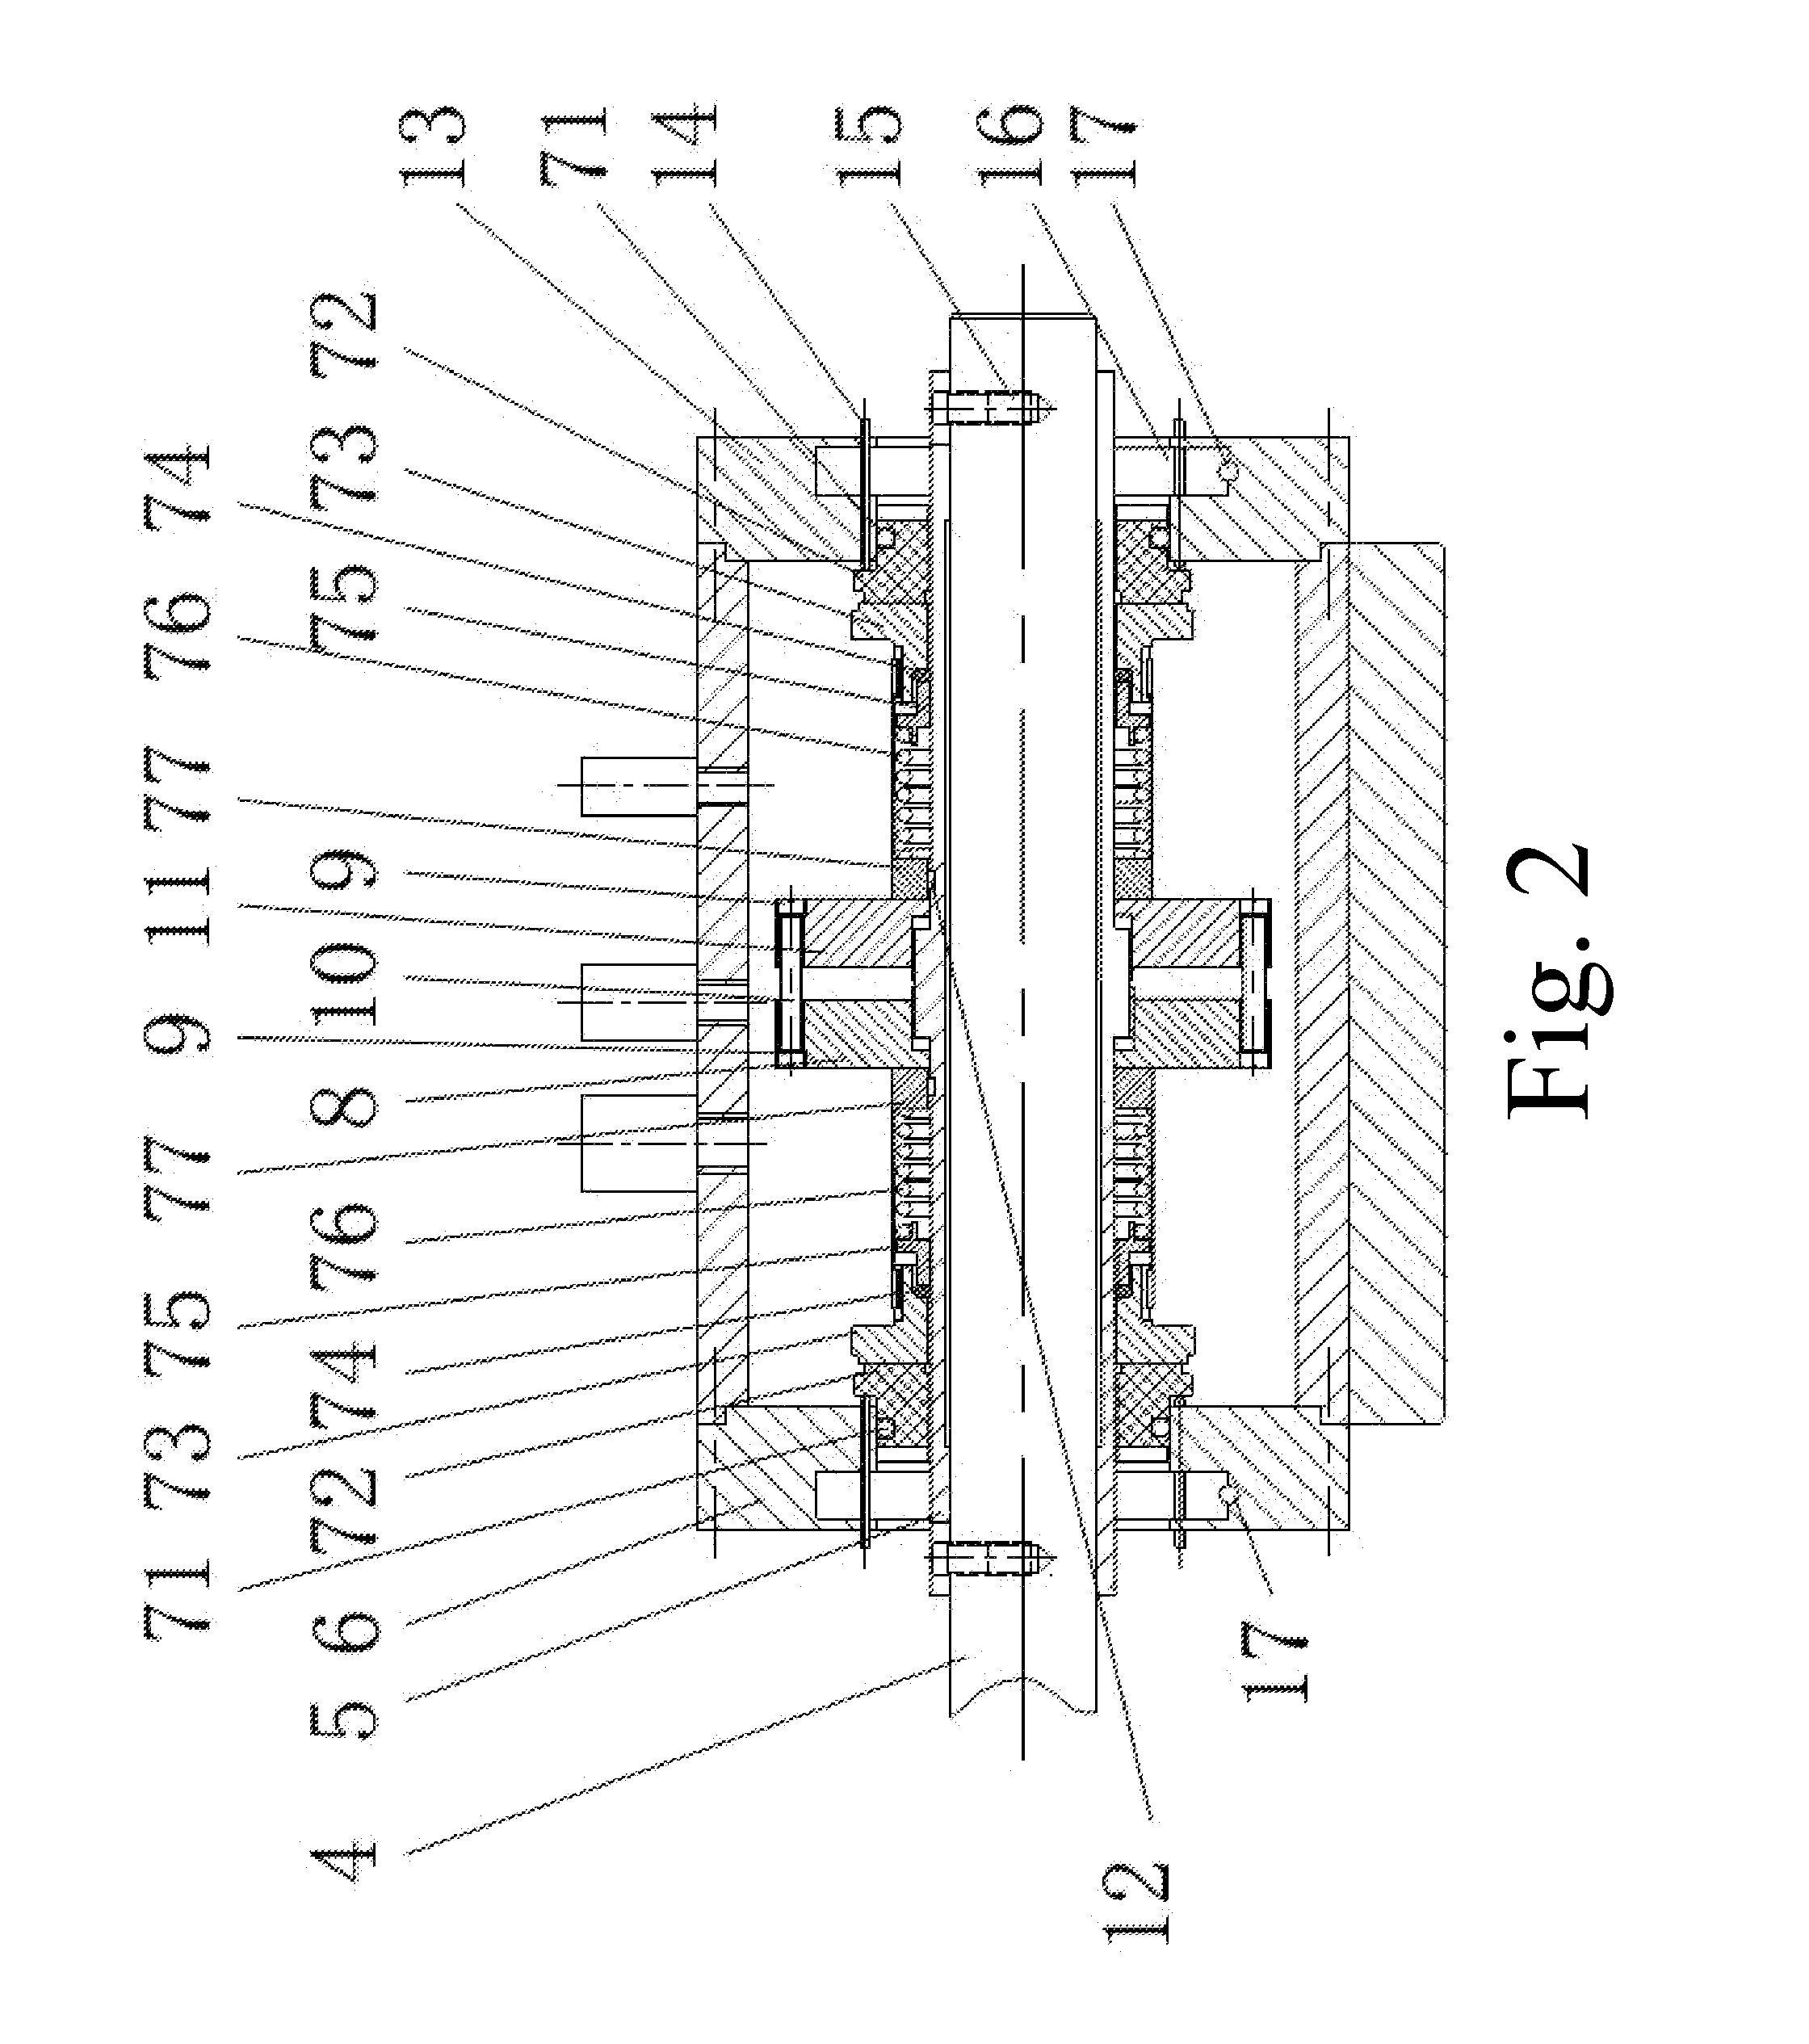 Device for testing mechanical seal performance